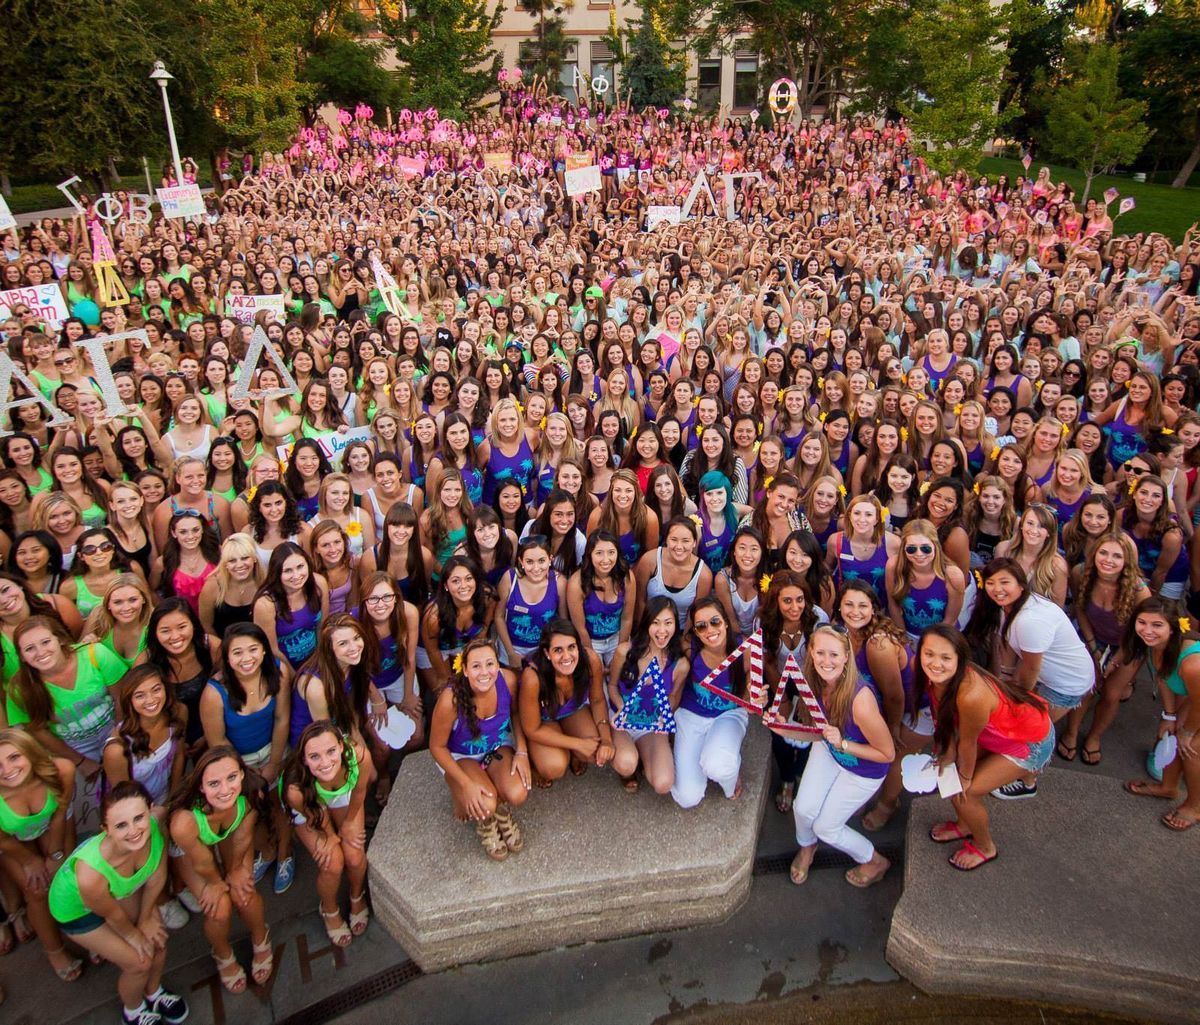 7 Stereotypes Sorority Girls Often Deal With